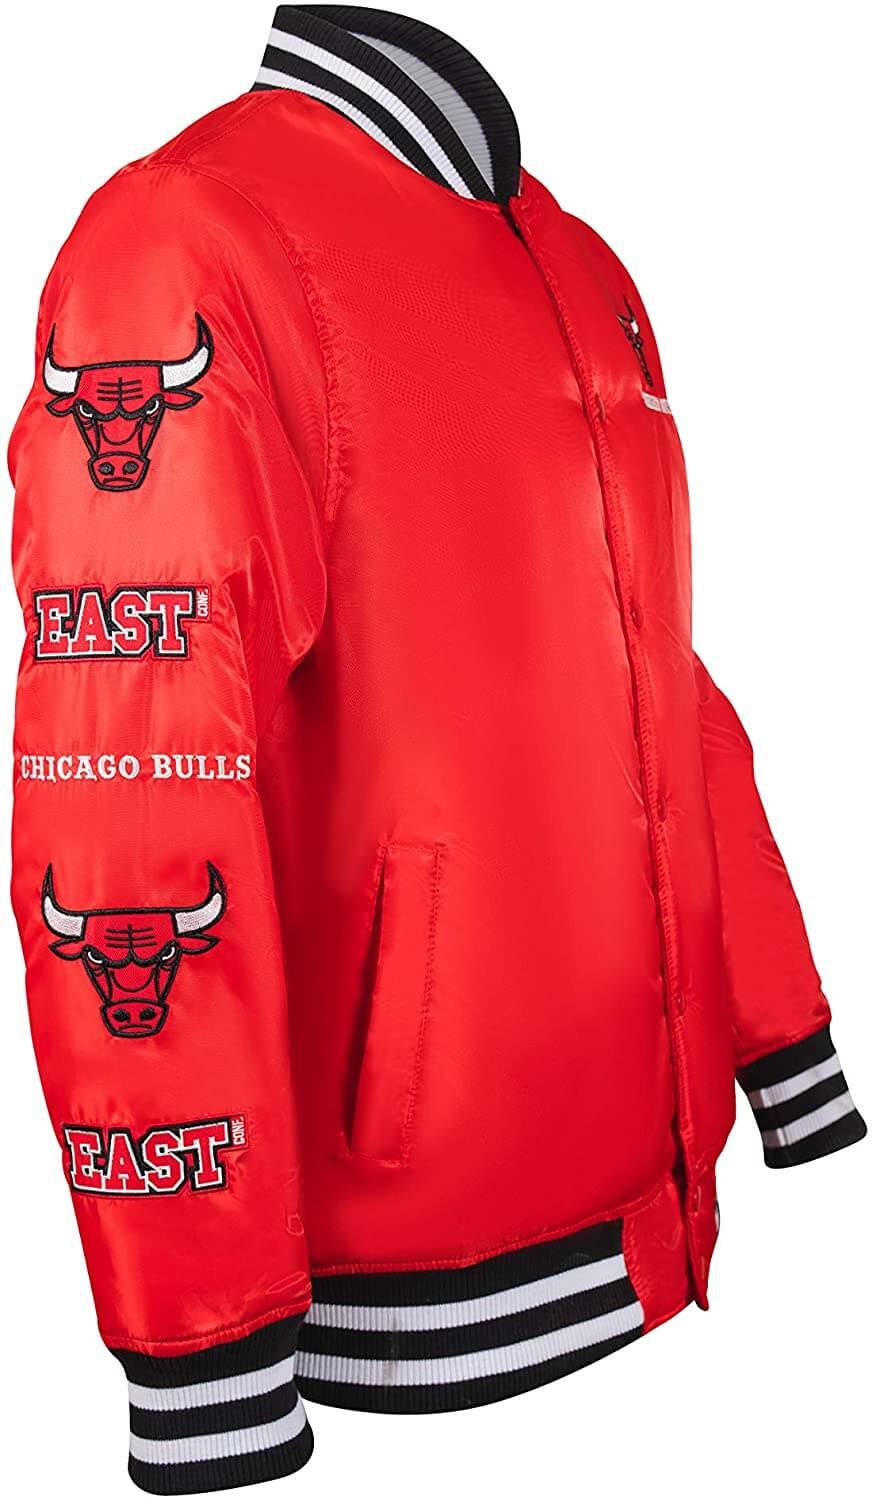 Legit Bulls by Ultra Game, Men's Fashion, Coats, Jackets and